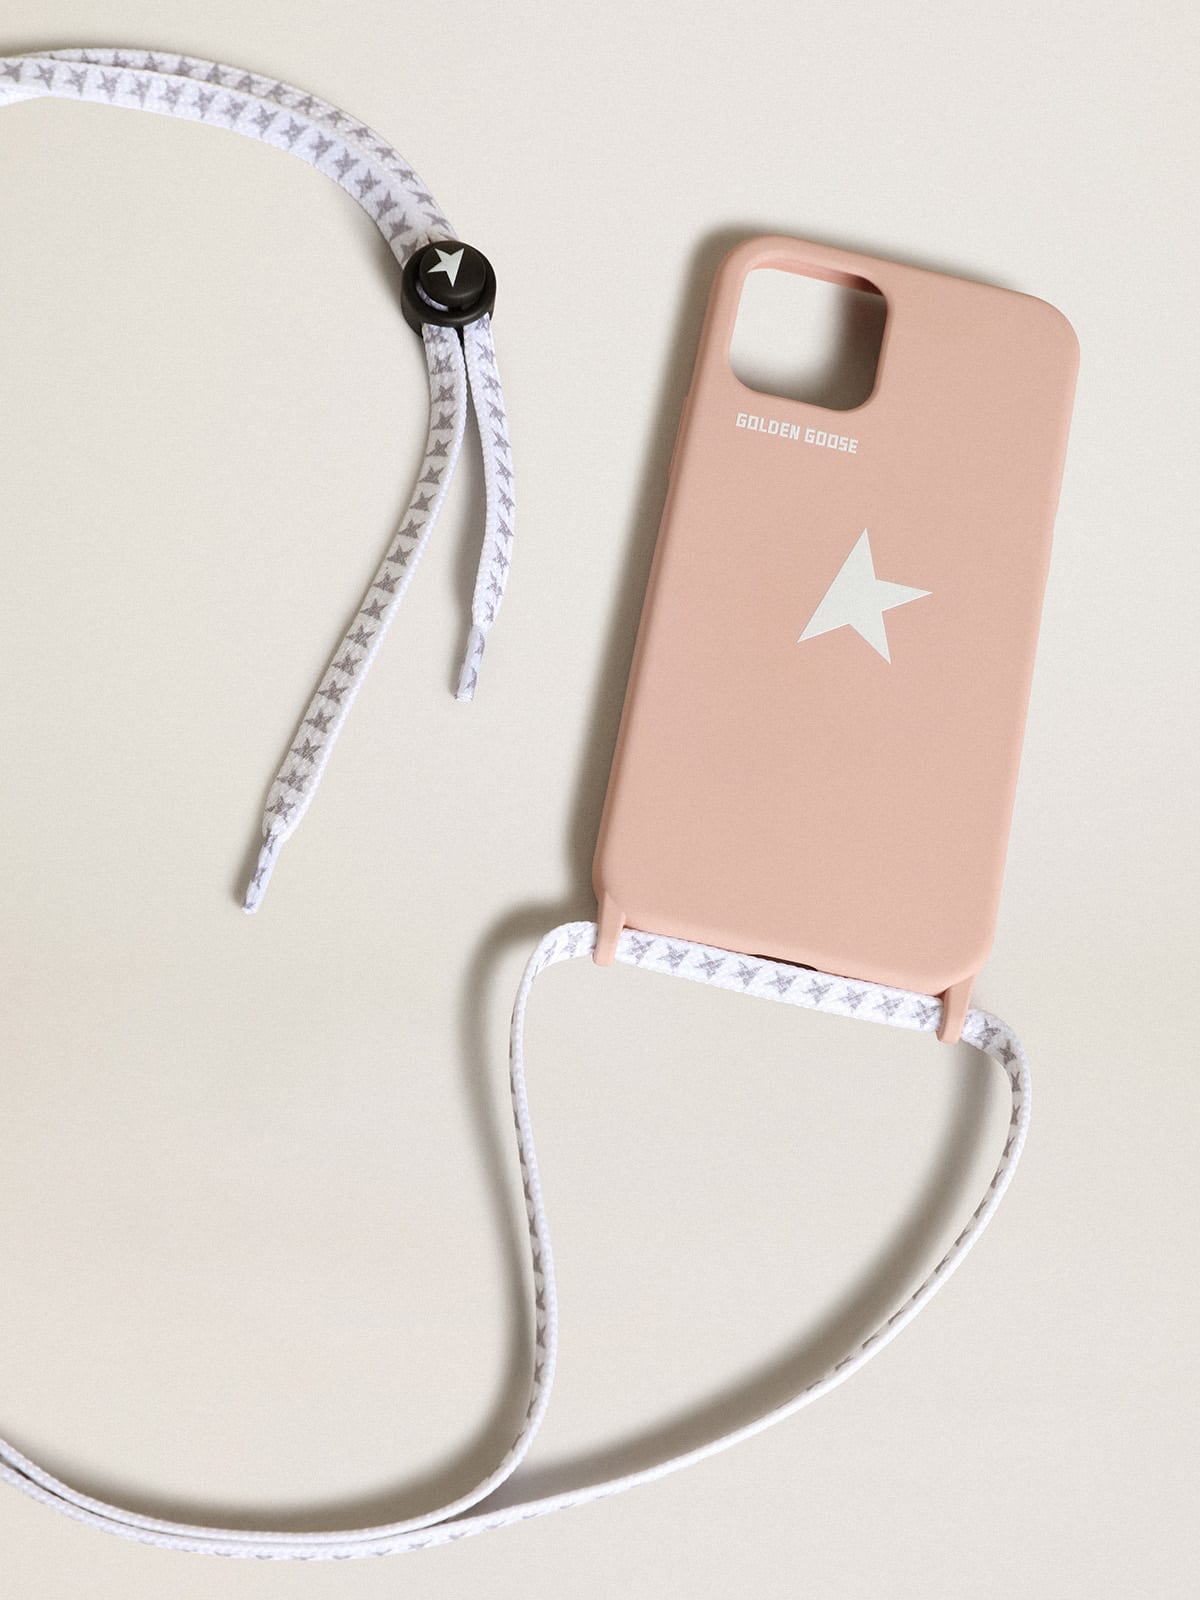 Pale pink iPhone 12 and 12 Pro case with contrasting white logo and logo lanyards